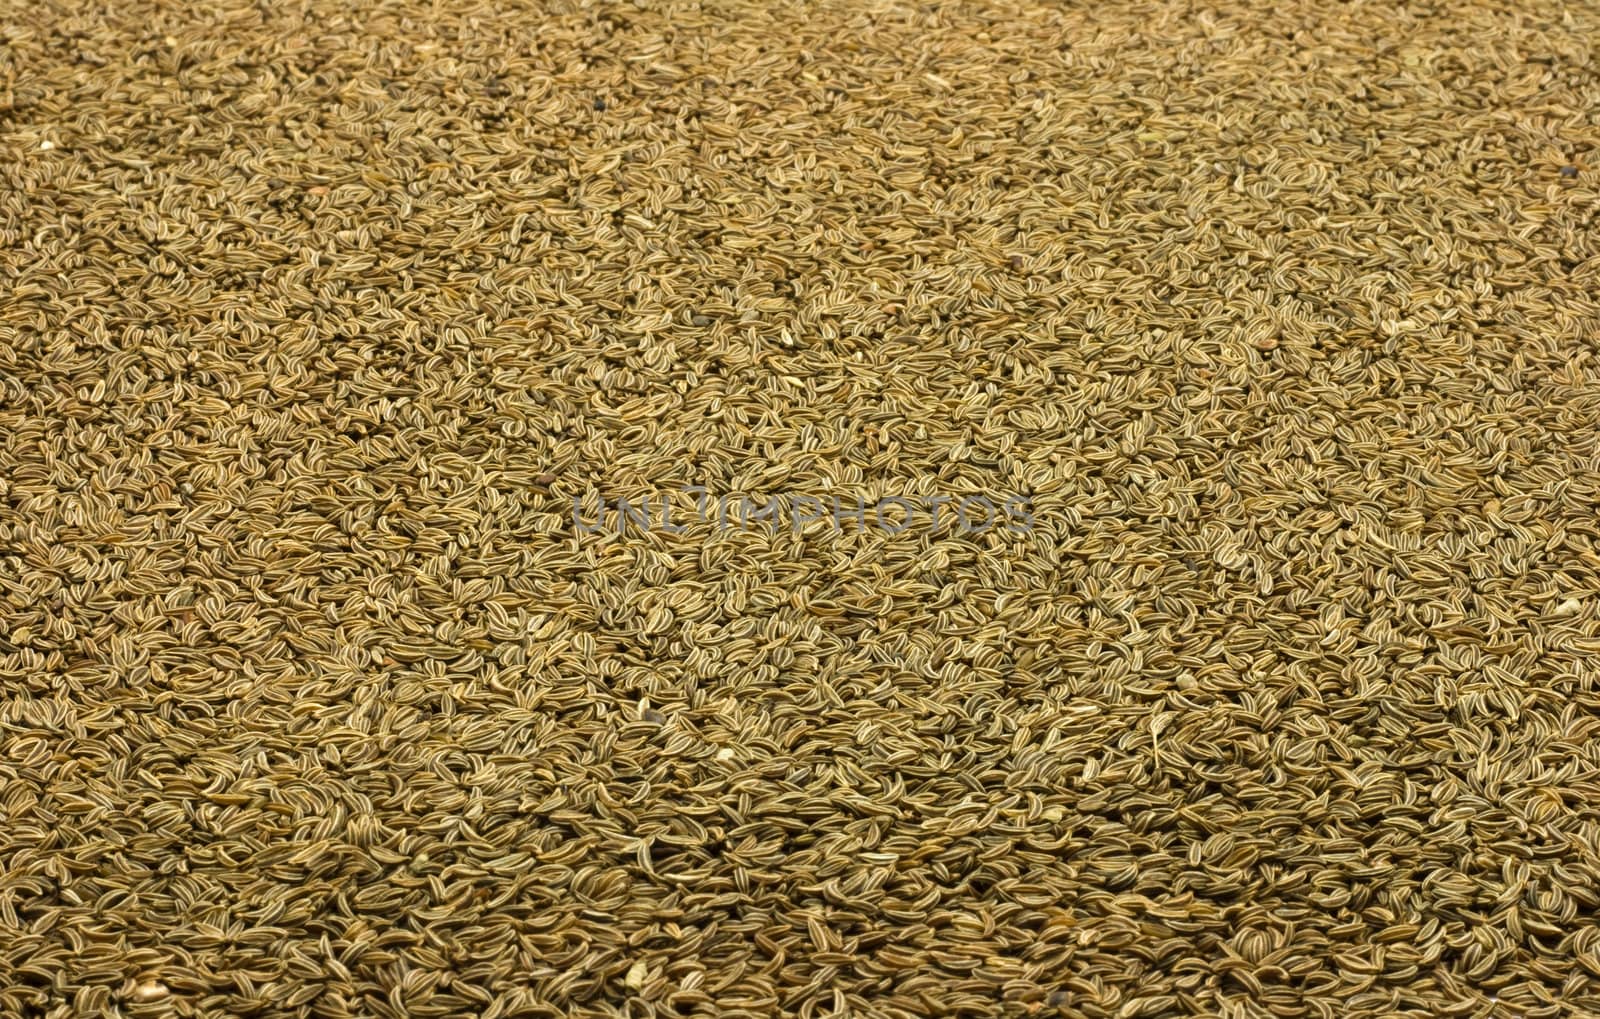 Caraway seeds pattern background